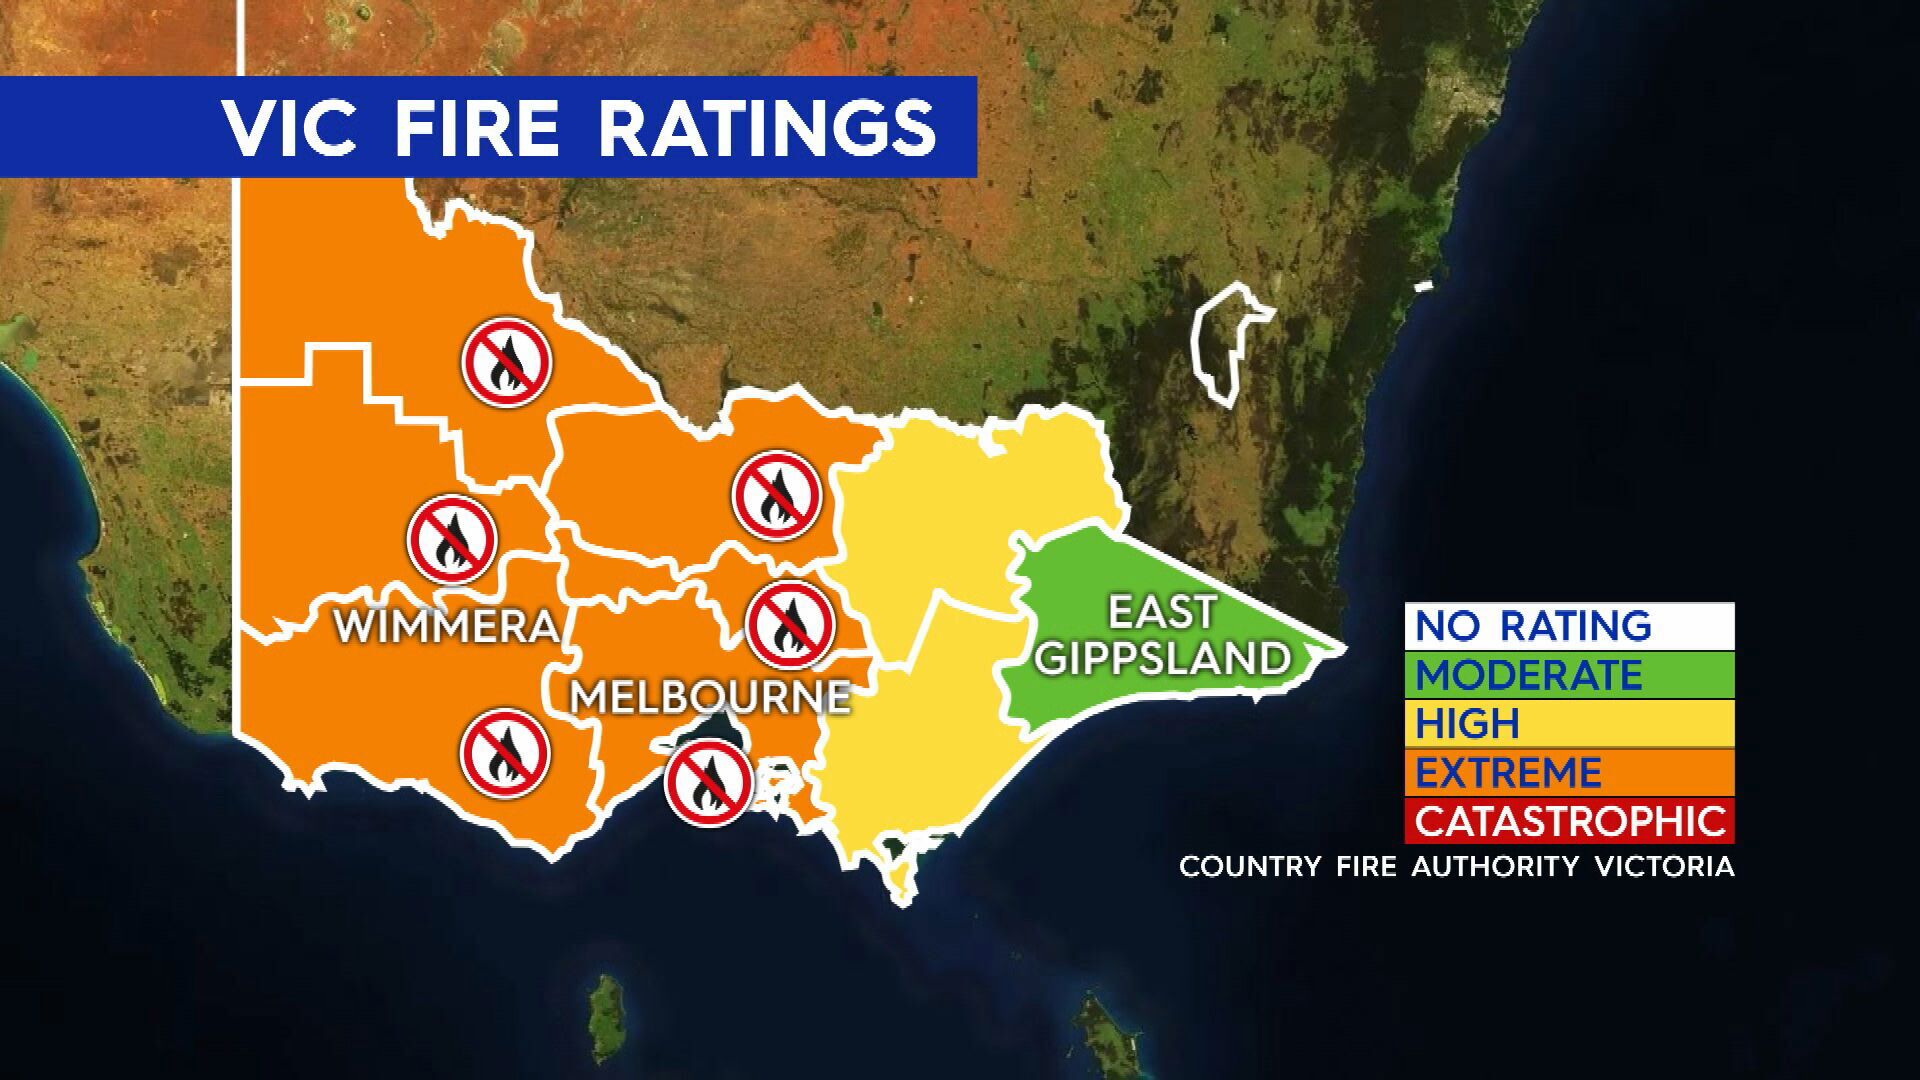 communities in victoria's west told to evacuate as out-of-control fire burns